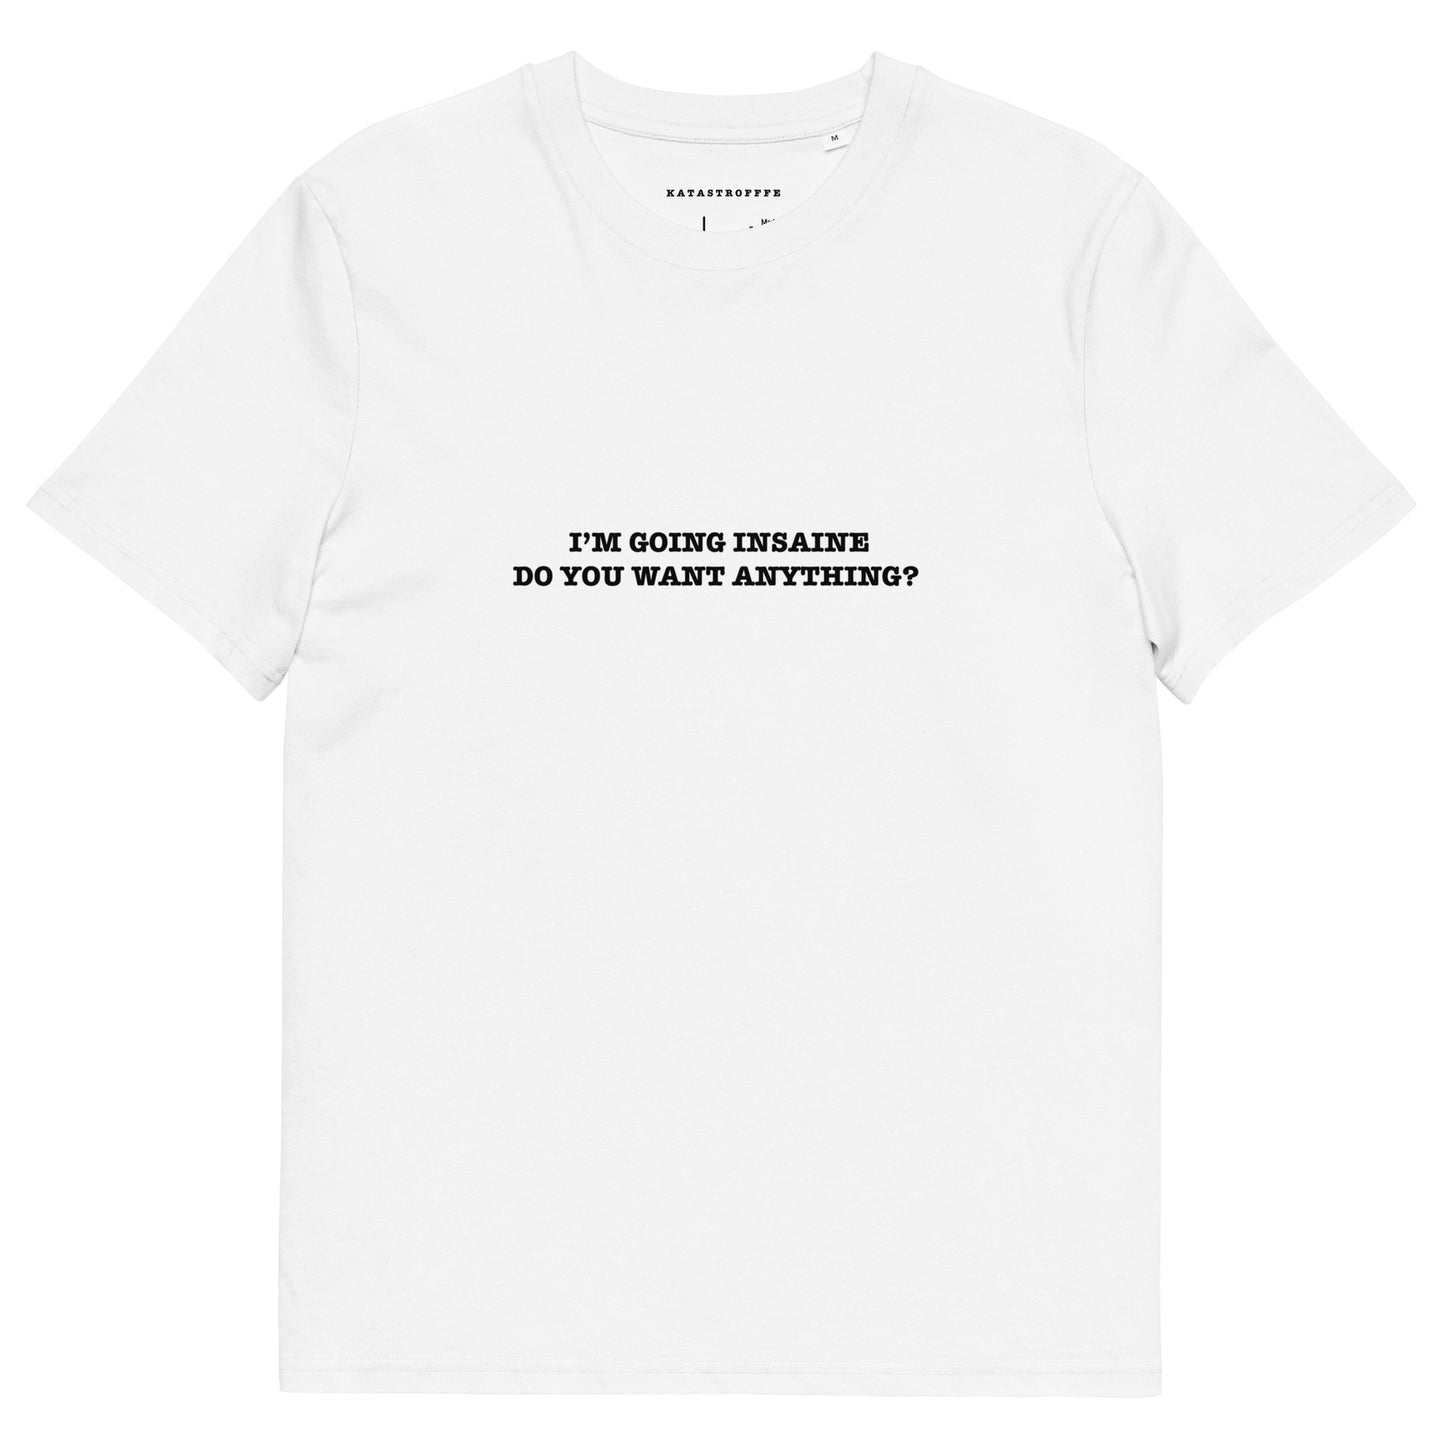 I’M GOING INSAINE DO YOU WANT ANYTHING? Unisex organic cotton t-shirt